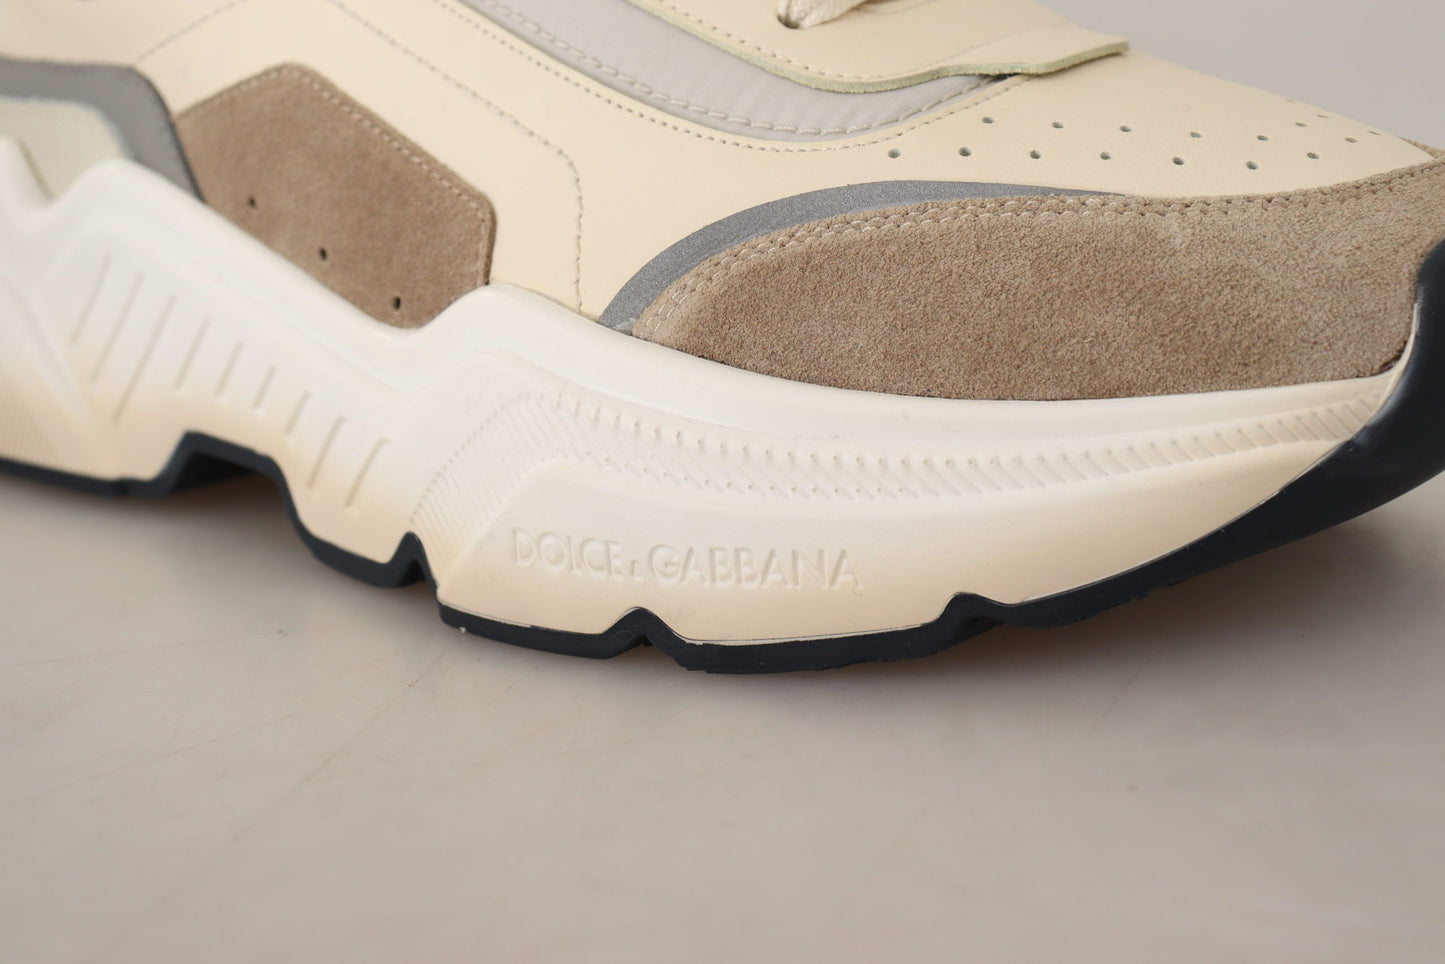 Daymaster Casual Beige Leather Sneakers